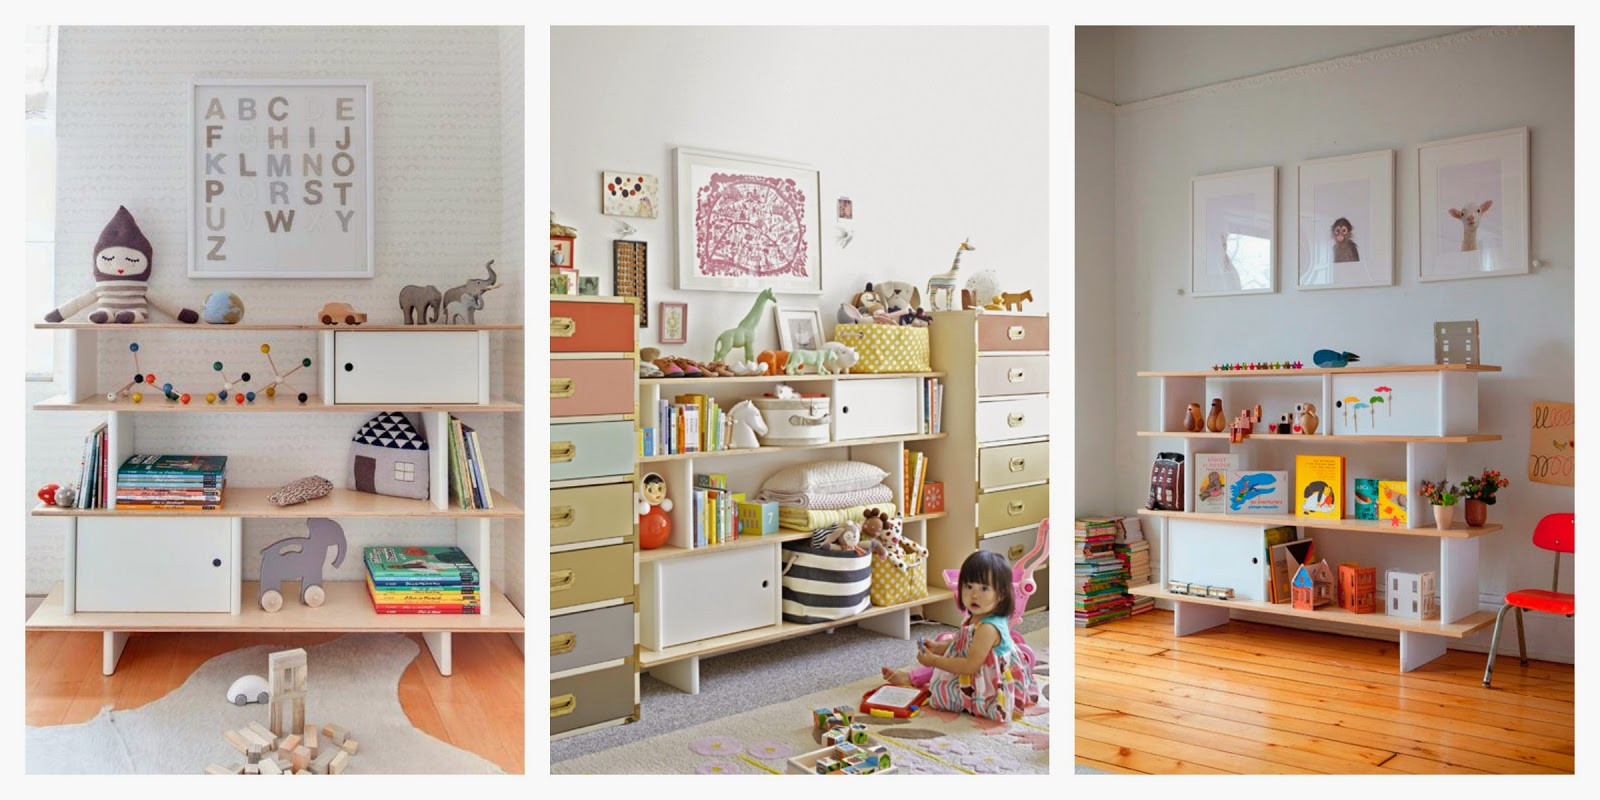 Kids Room Pinterest
 The 5 Coolest bedroom items every kid needs rding to